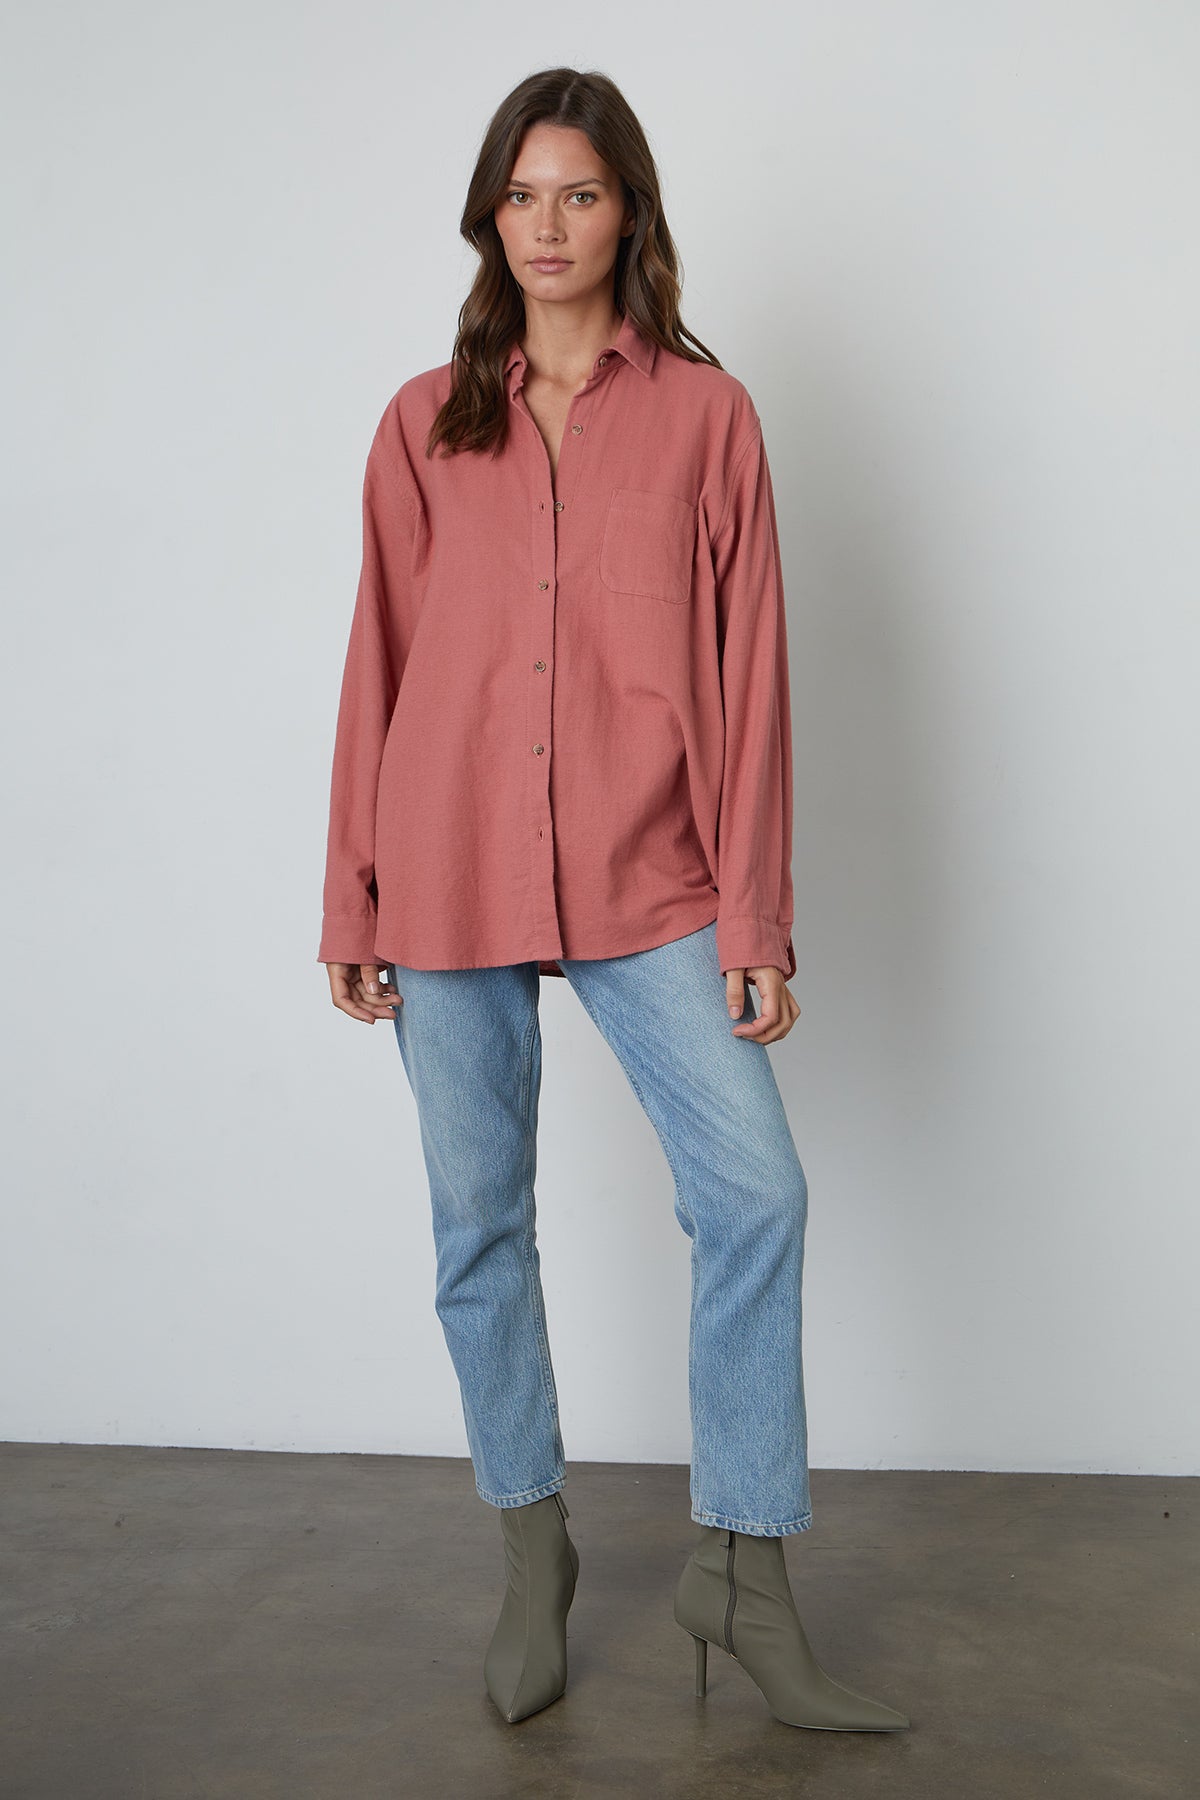   Chelsey Button-Up Shirt in Cranapple colored flannel front with light blue denim 